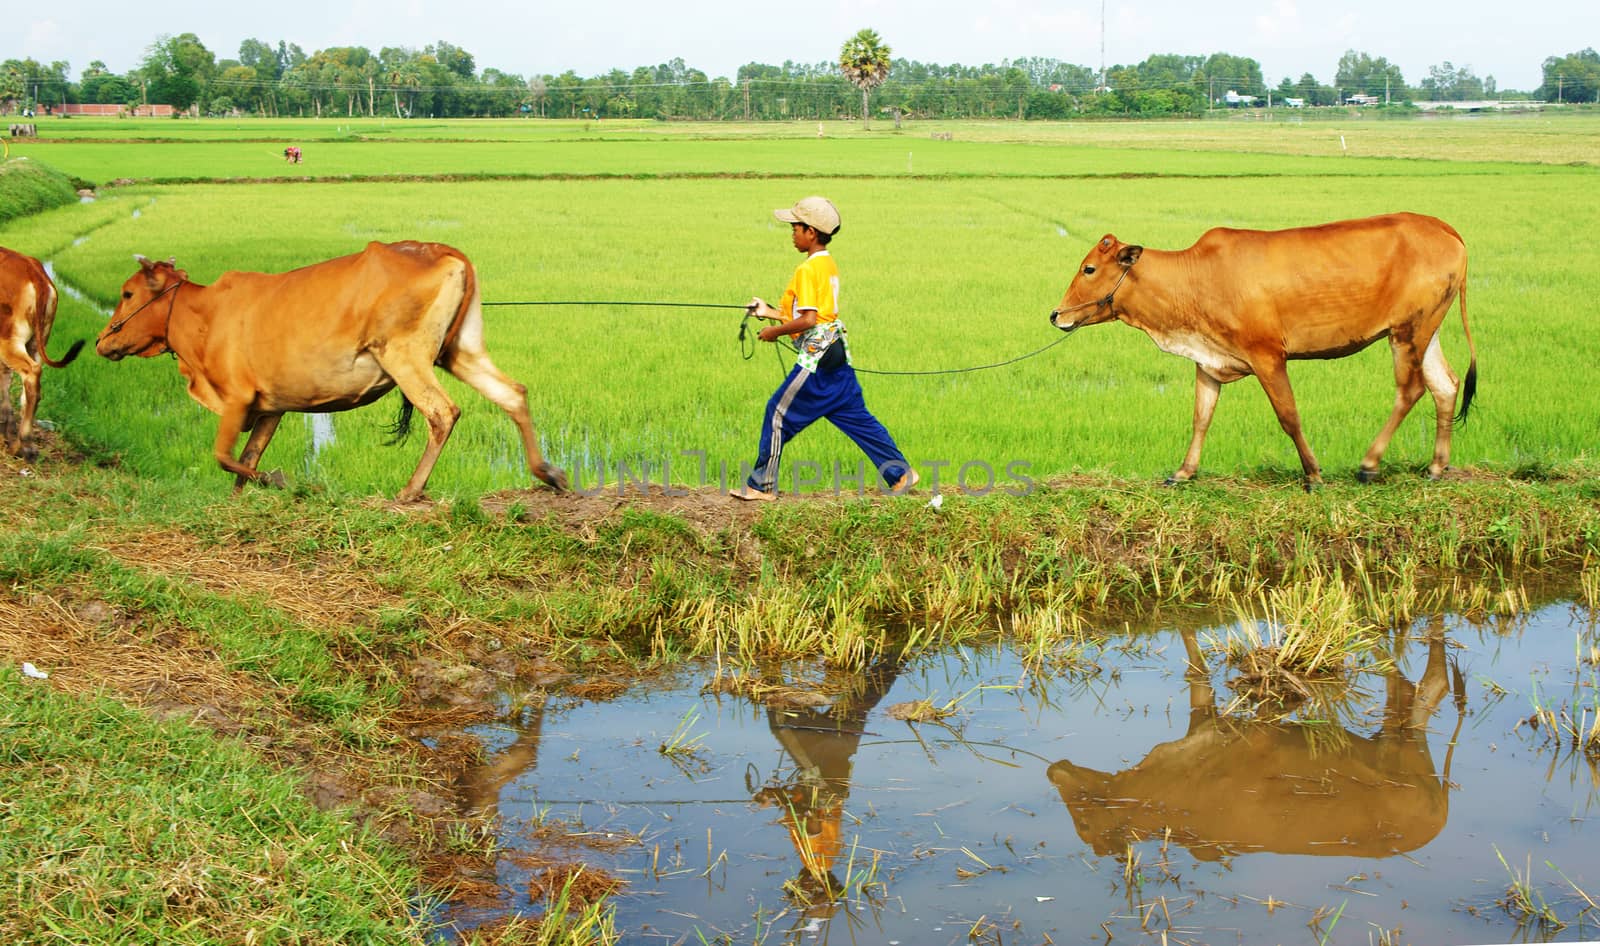  Asian child labor tend cow, Vietnam rice plantation by xuanhuongho